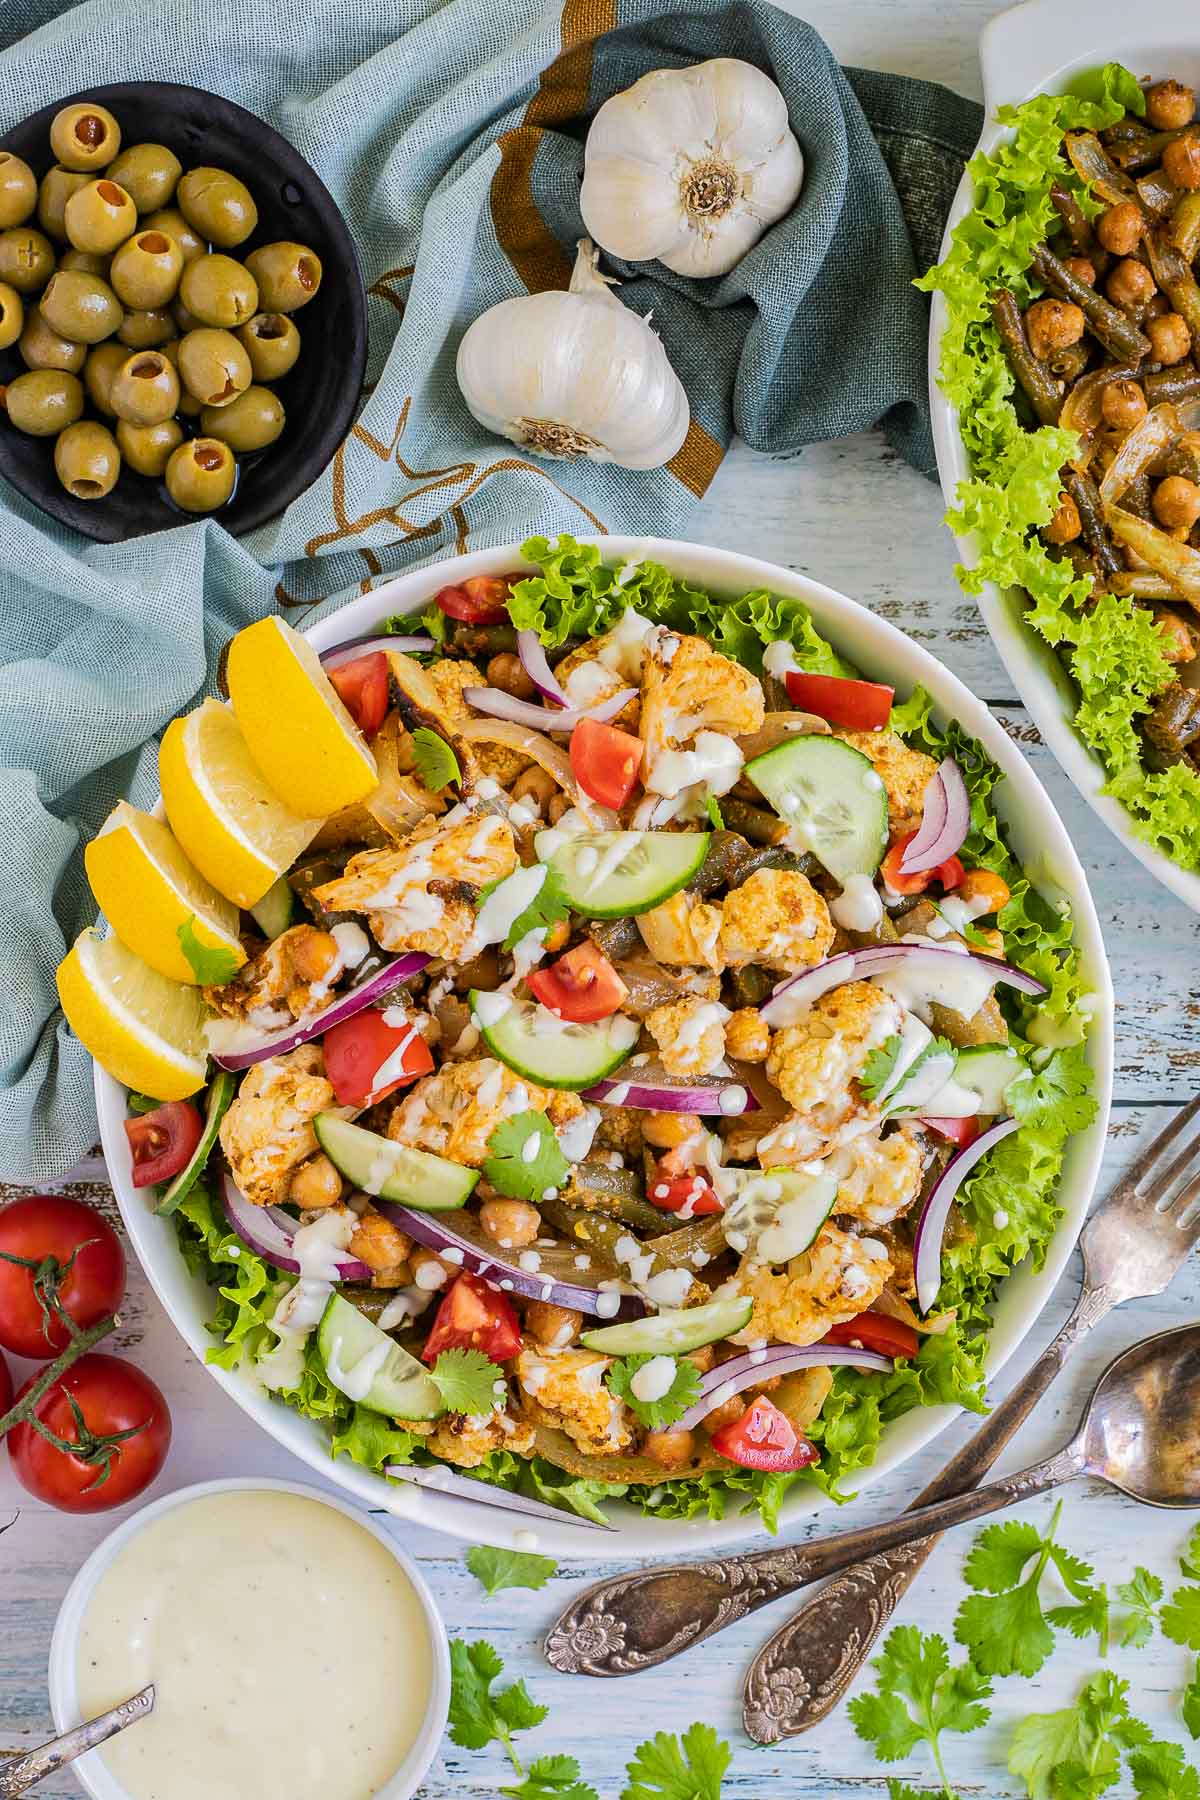 A large white bowl with green salad leaves topped with cauliflower florets, green beans, chickpeas, fresh tomatoes drizzled with a white sauce. Olives and more roasted veggies are next to it on small plates. 